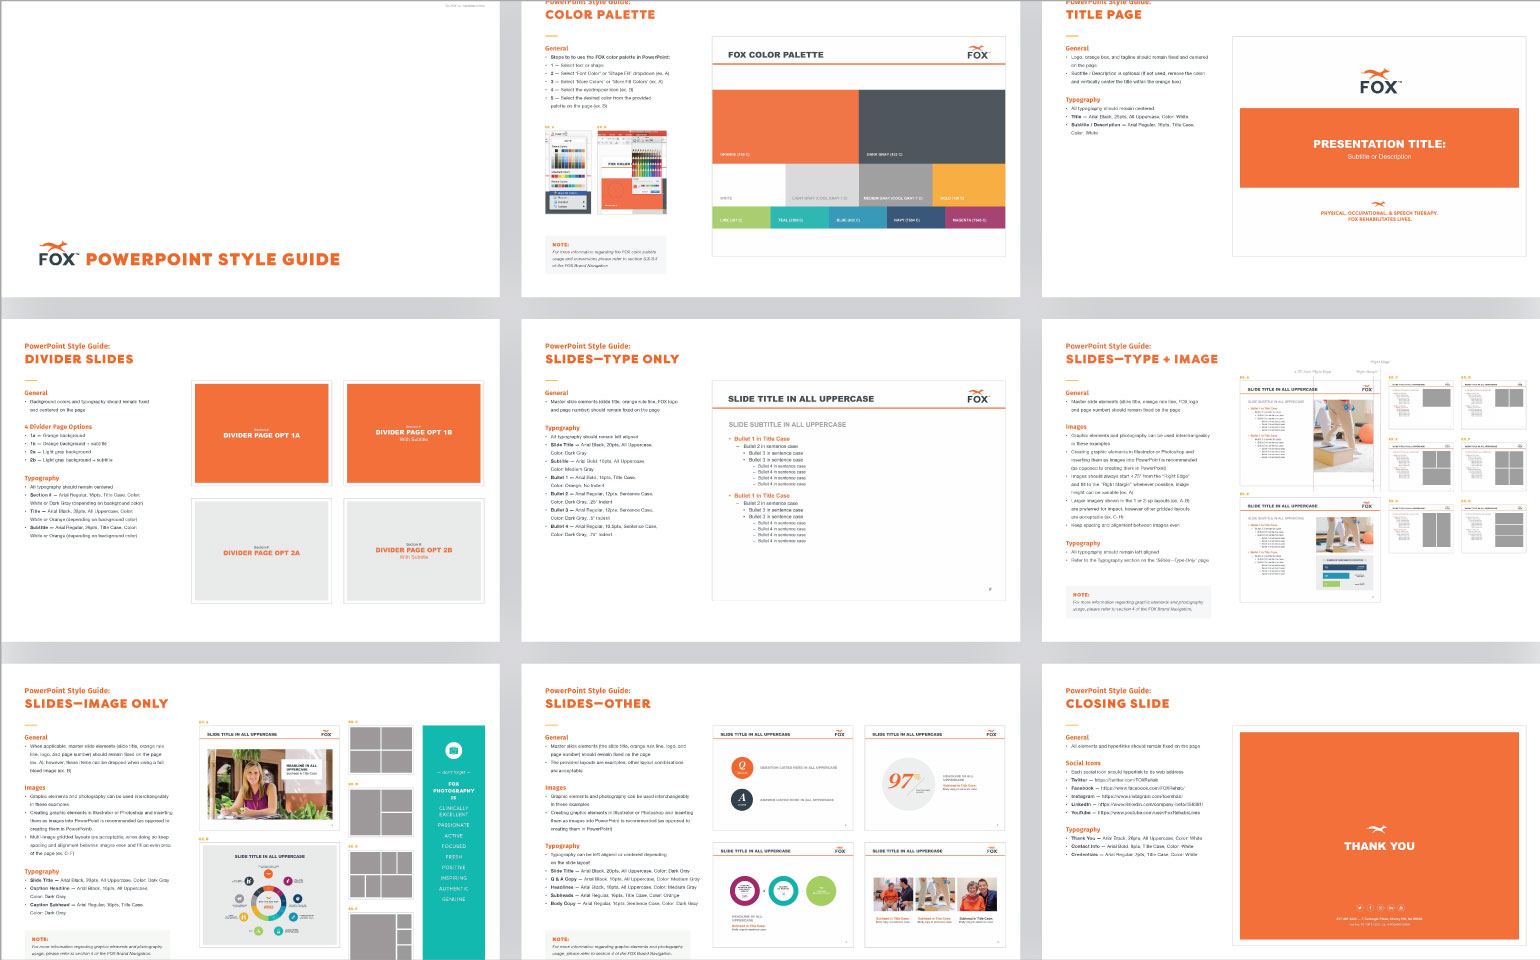 PowerPoint Style Guide